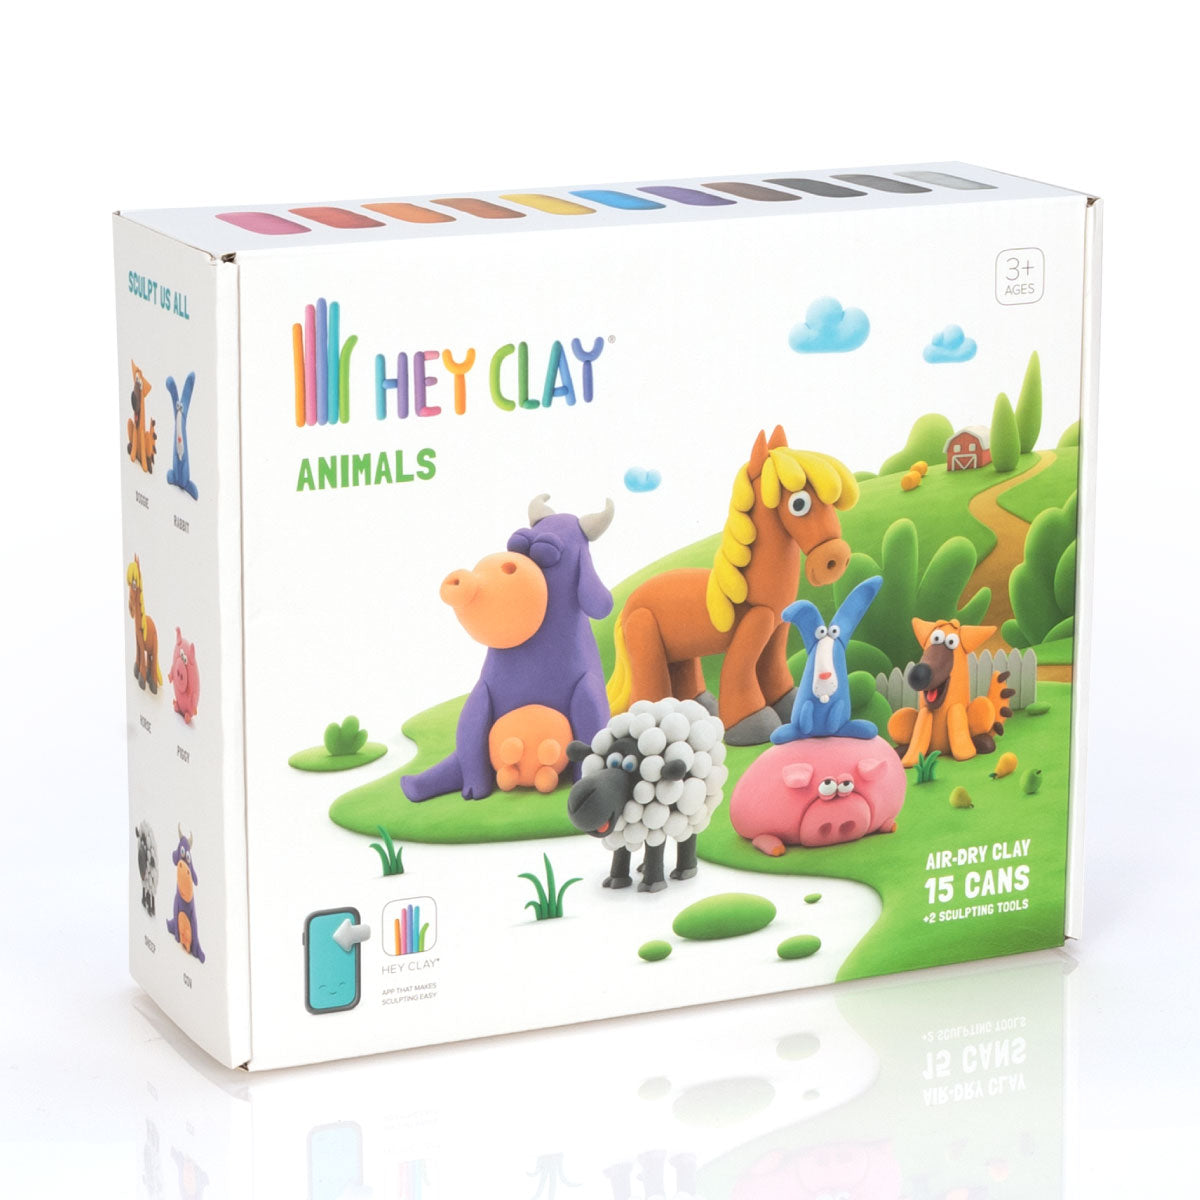 Hey Clay Animals - 15 Air-Dry Modeling Clays